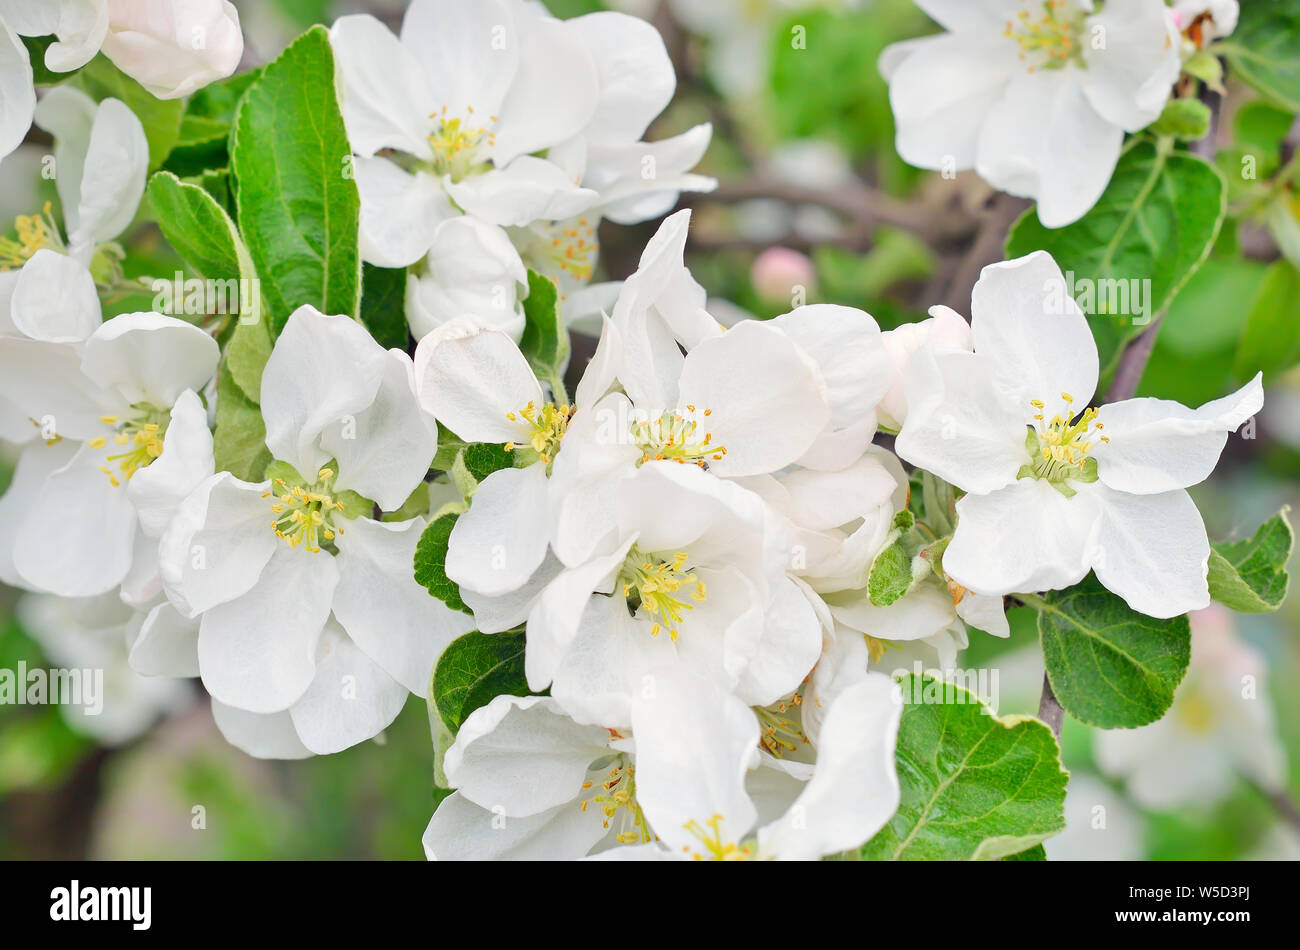 Blossoming of apple trees in the garden Stock Photo